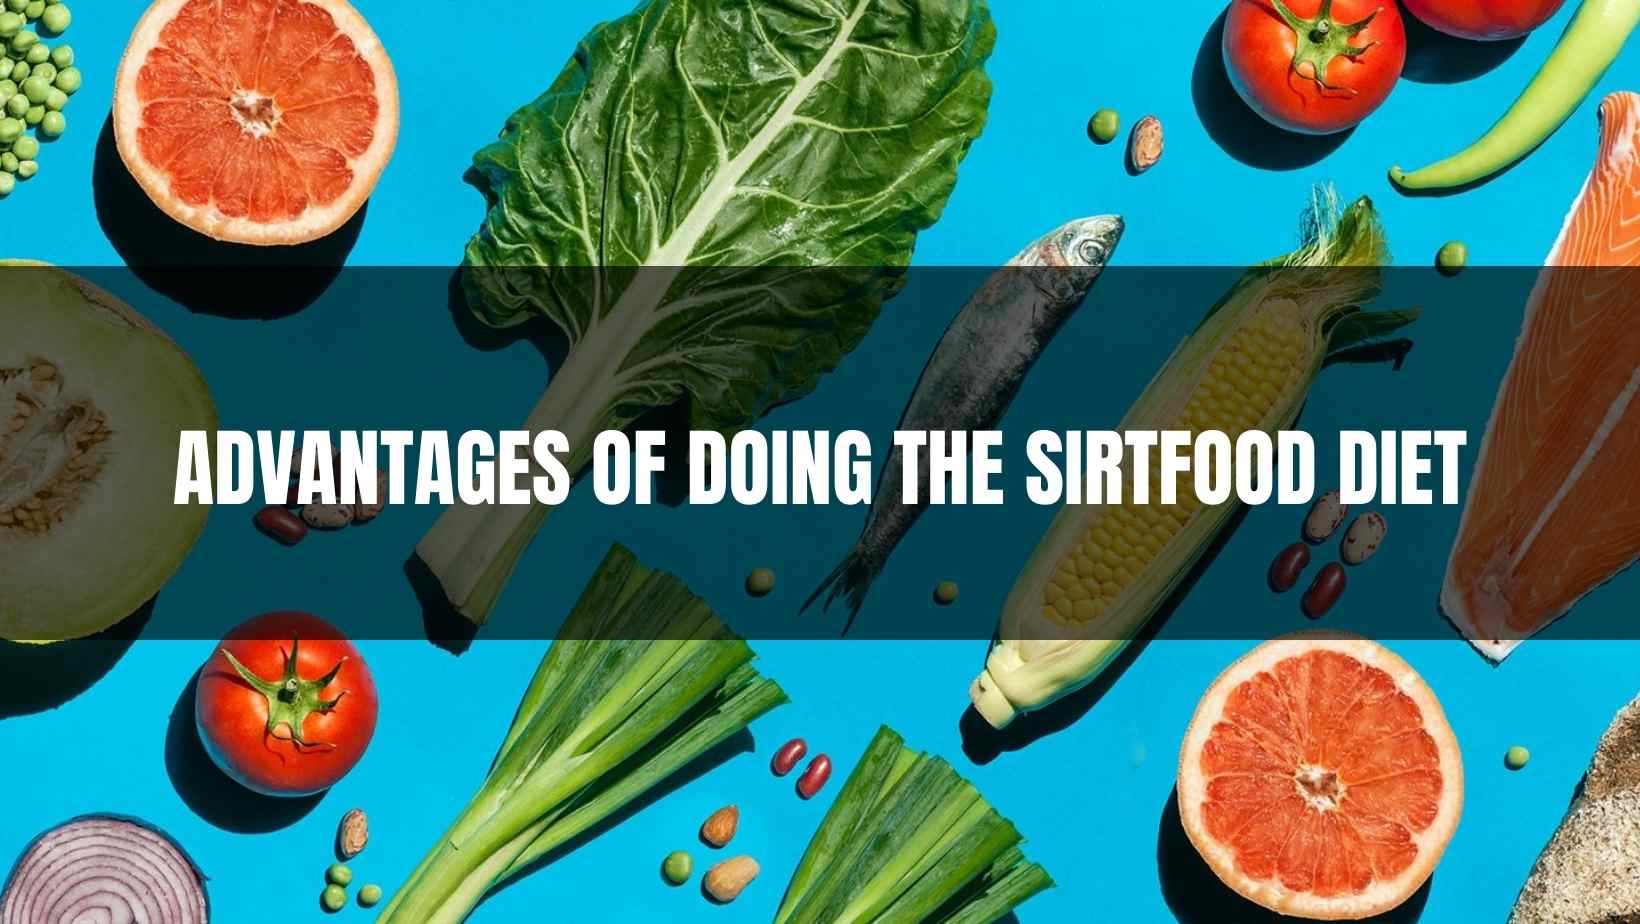 Advantages of Sirtfood Diet